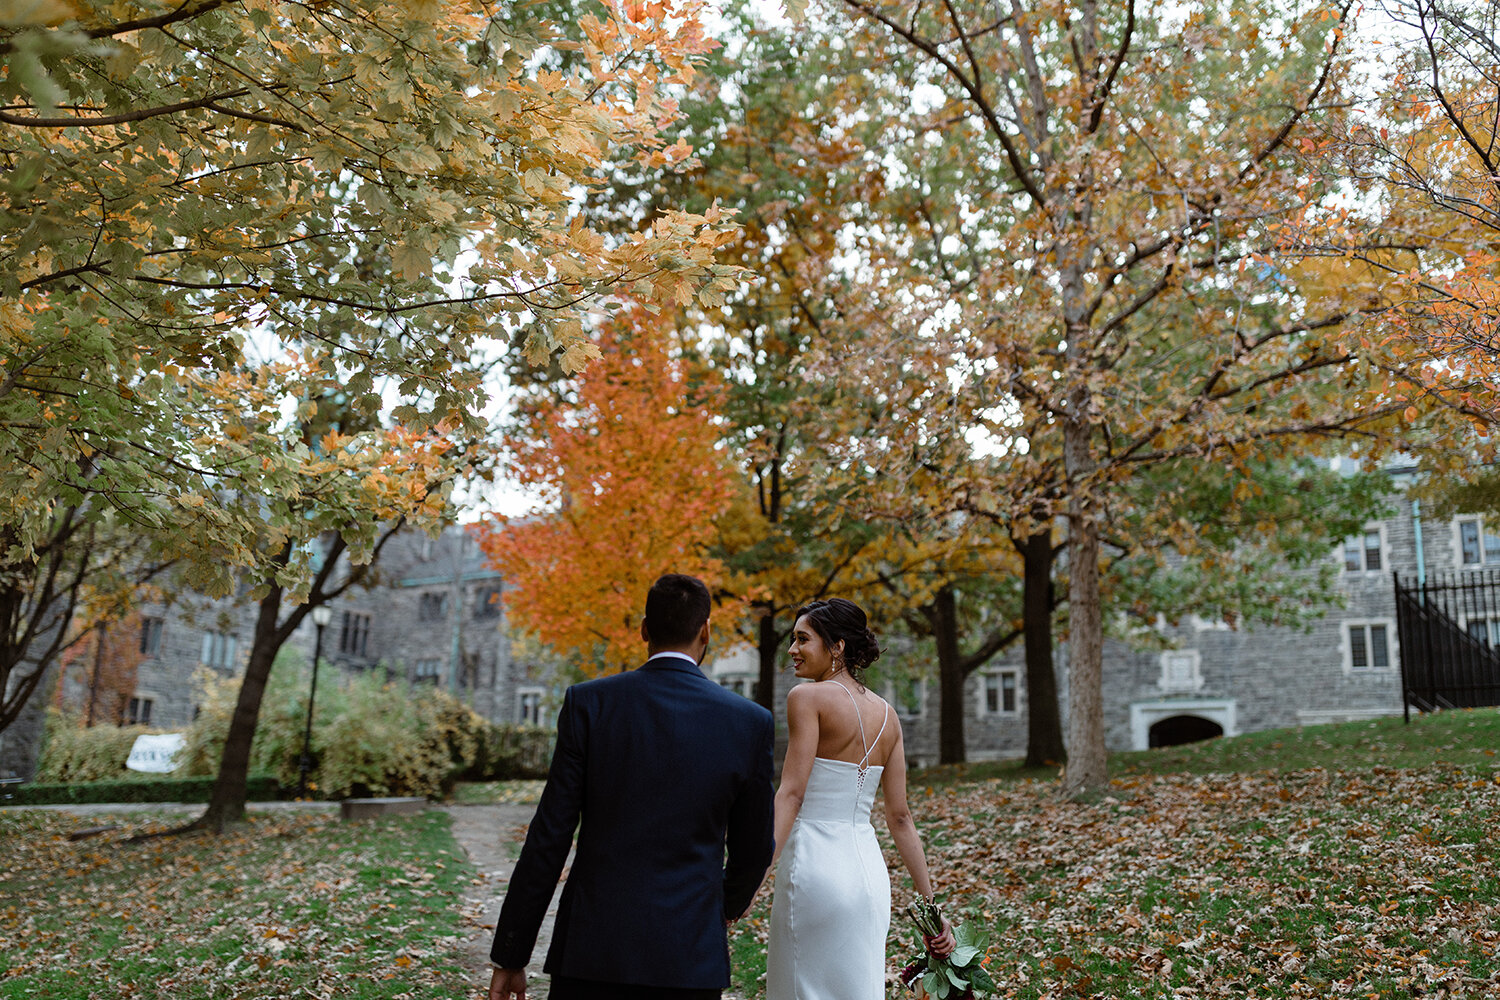 Small-Intimate-Elopement-Downtown-Toronto-U-of-T-Vows-where-to-elope-in-toronto-33.JPG